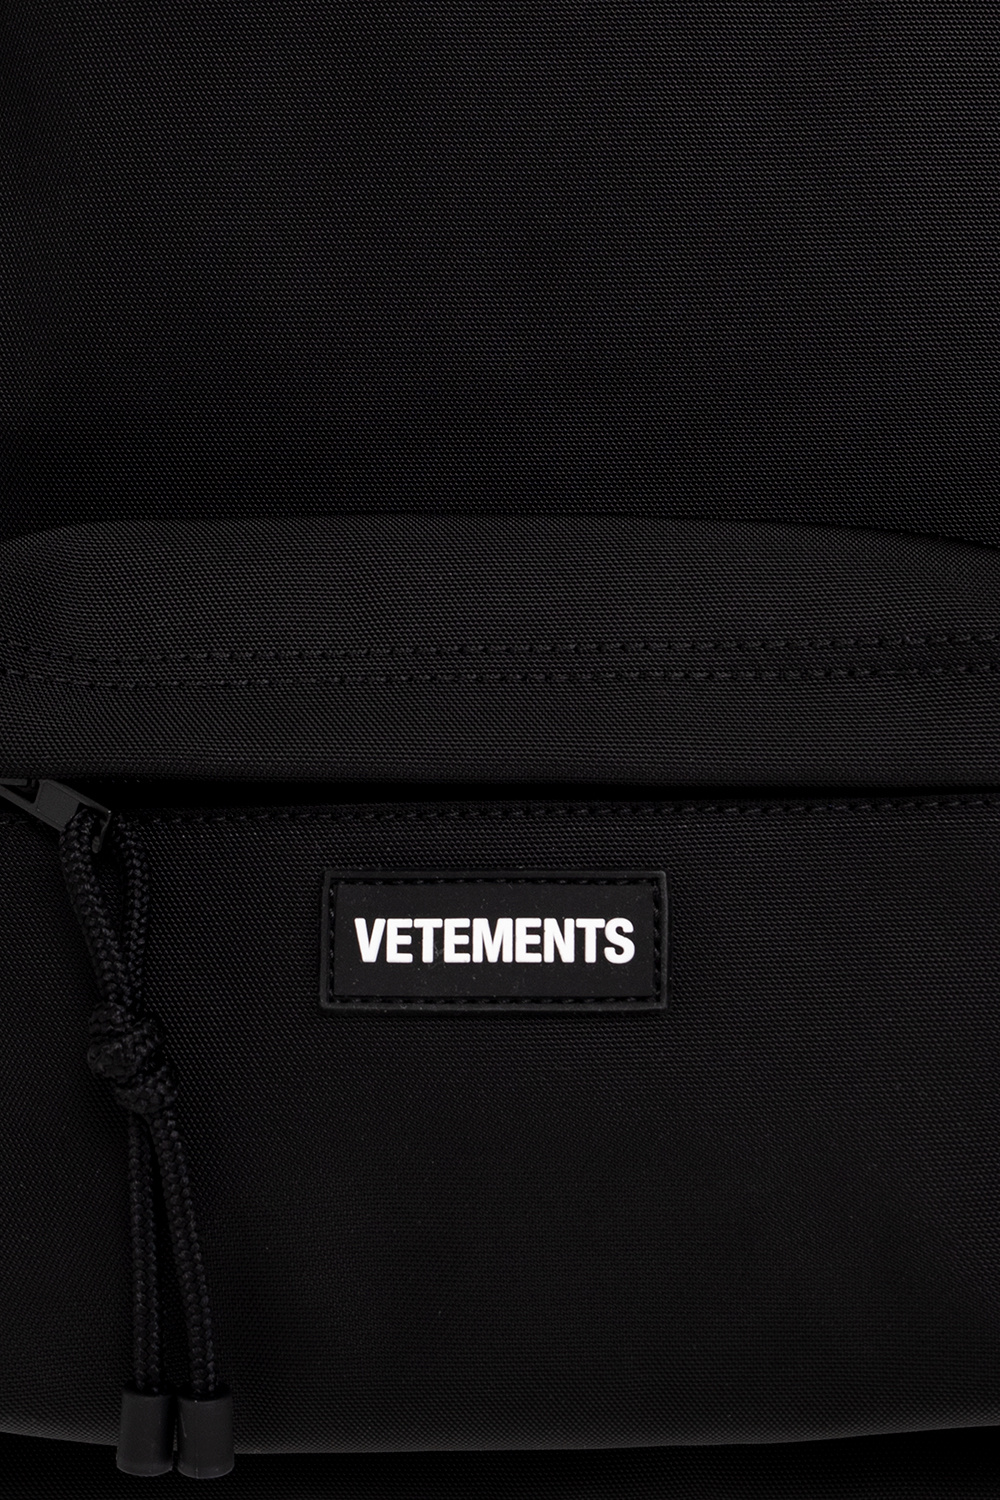 VETEMENTS that combines music, art and fashion